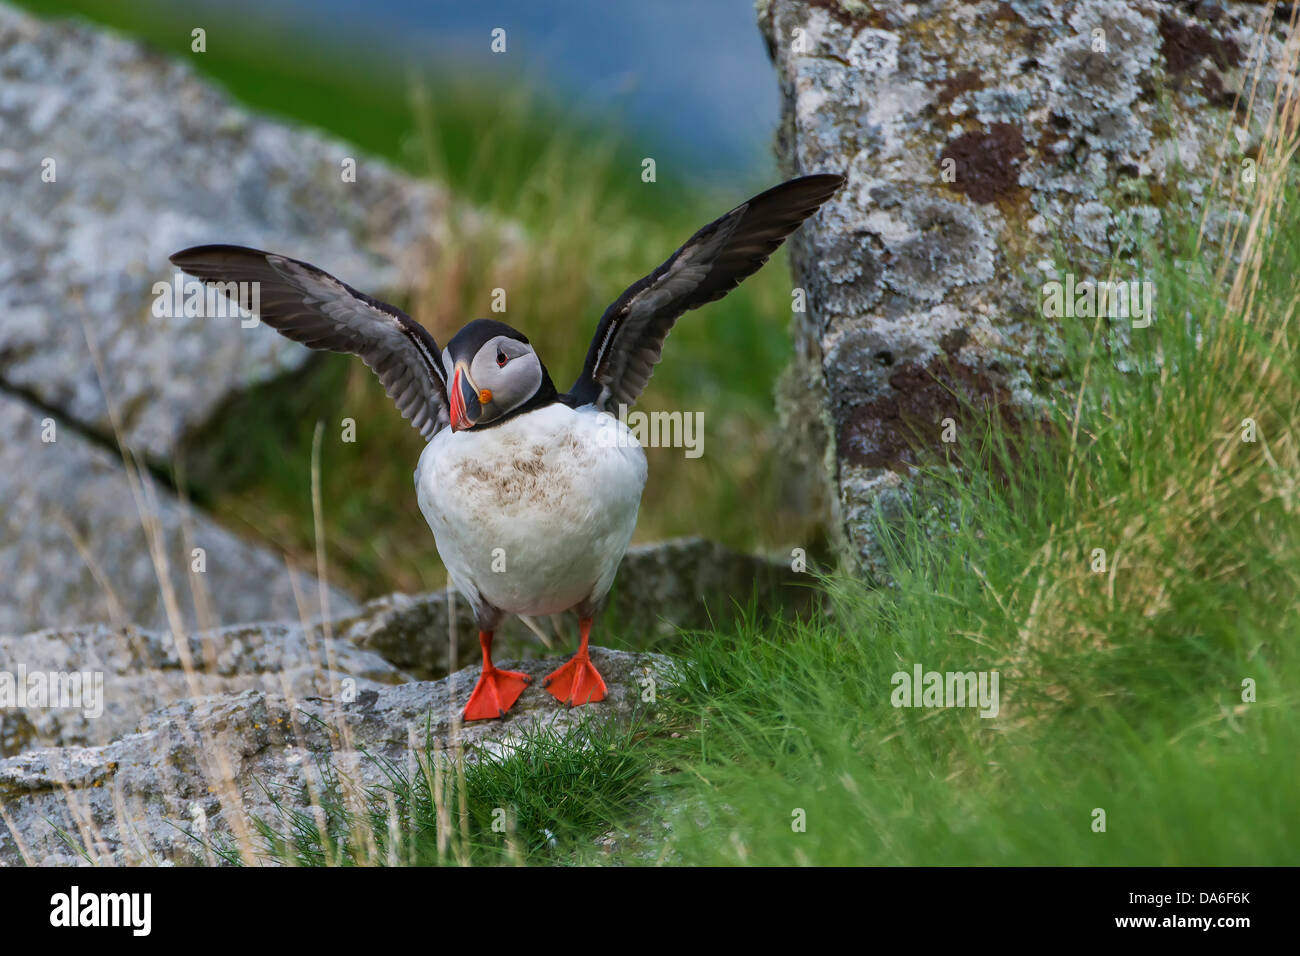 Atlantic Puffin or Common Puffin (Fratercula arctica) flapping its wings Stock Photo